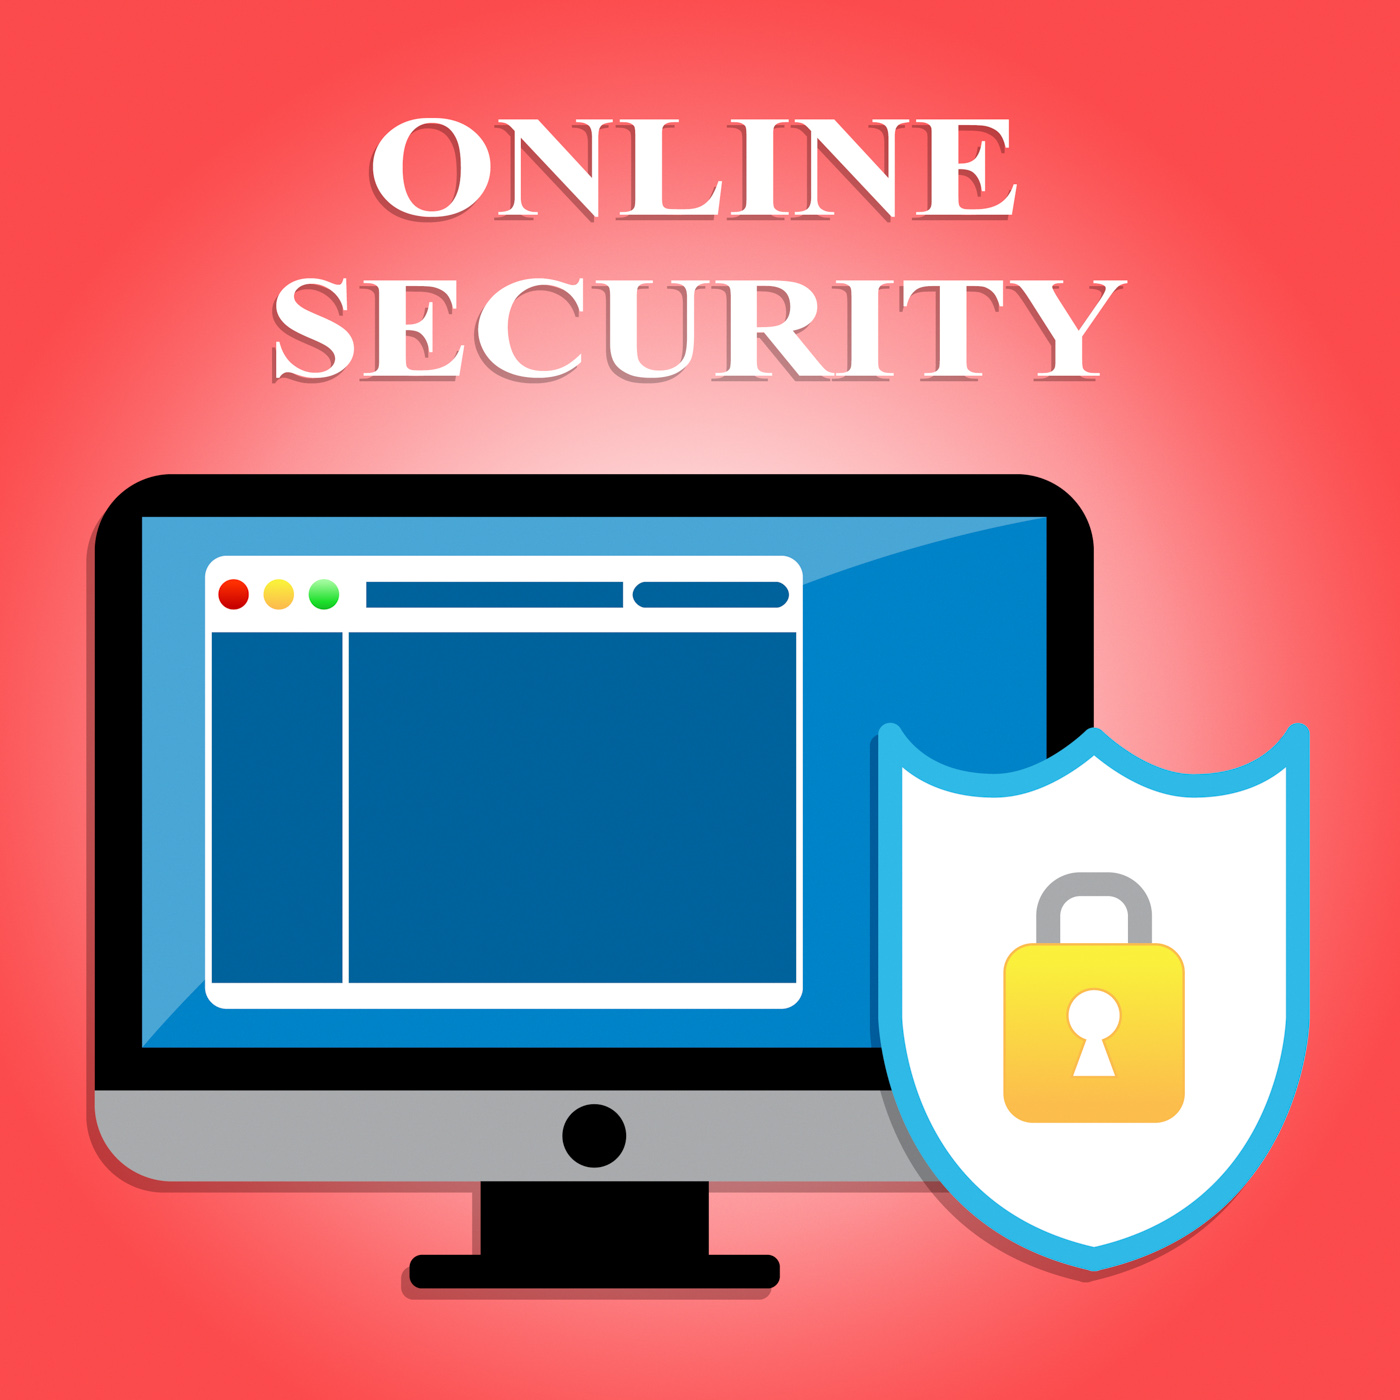 Online security shows web site and communication photo